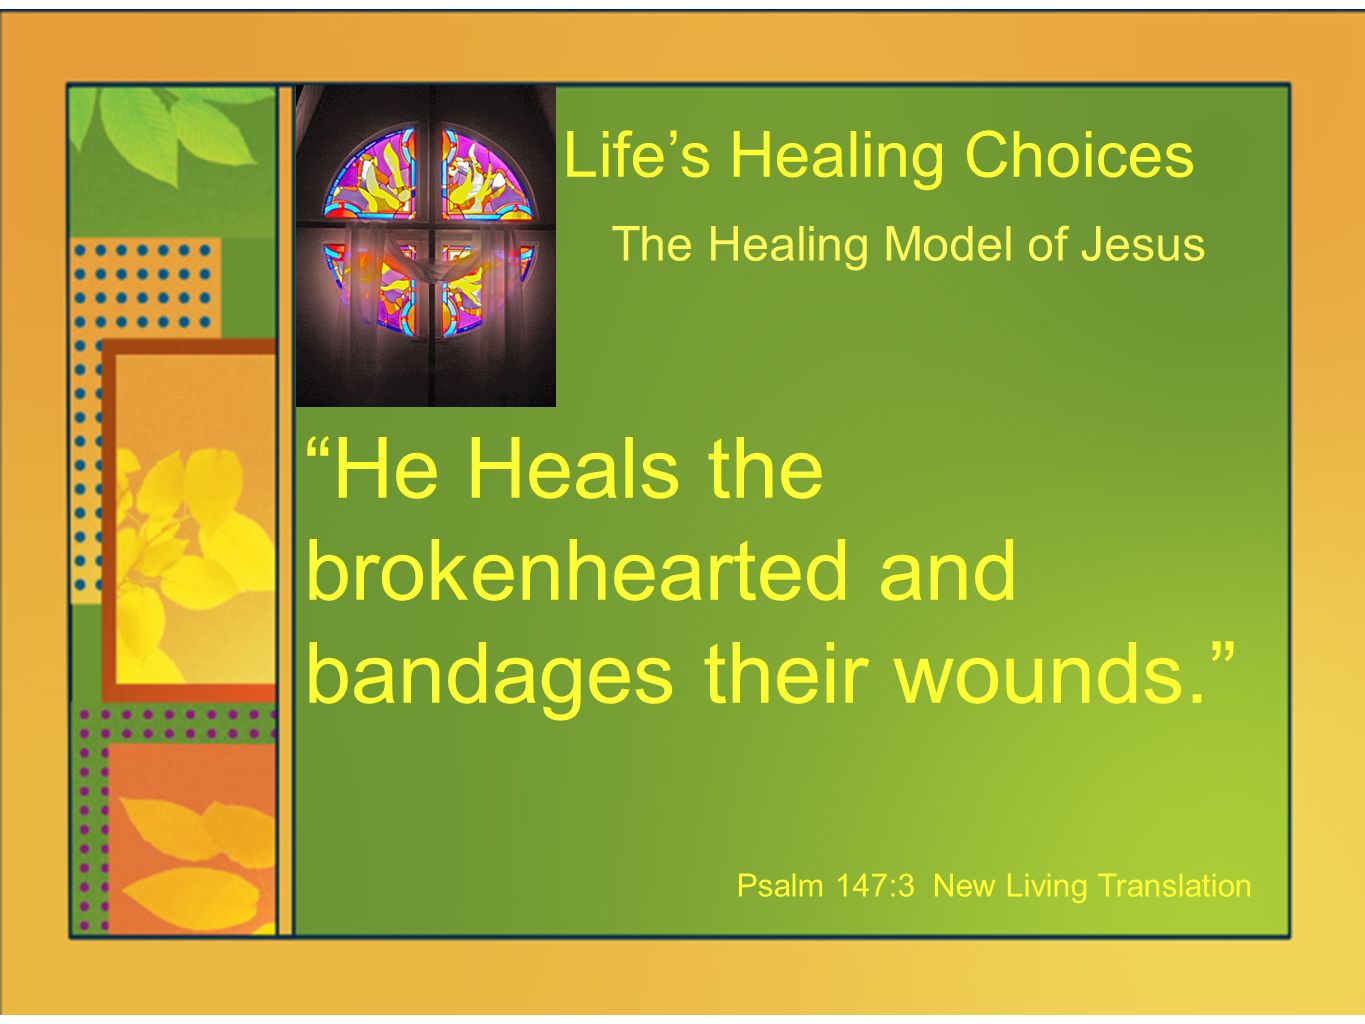 Life’s Healing Choices The Healing Model of Jesus He Heals the brokenhearted and bandages their wounds. Psalm 147:3 New Living Translation